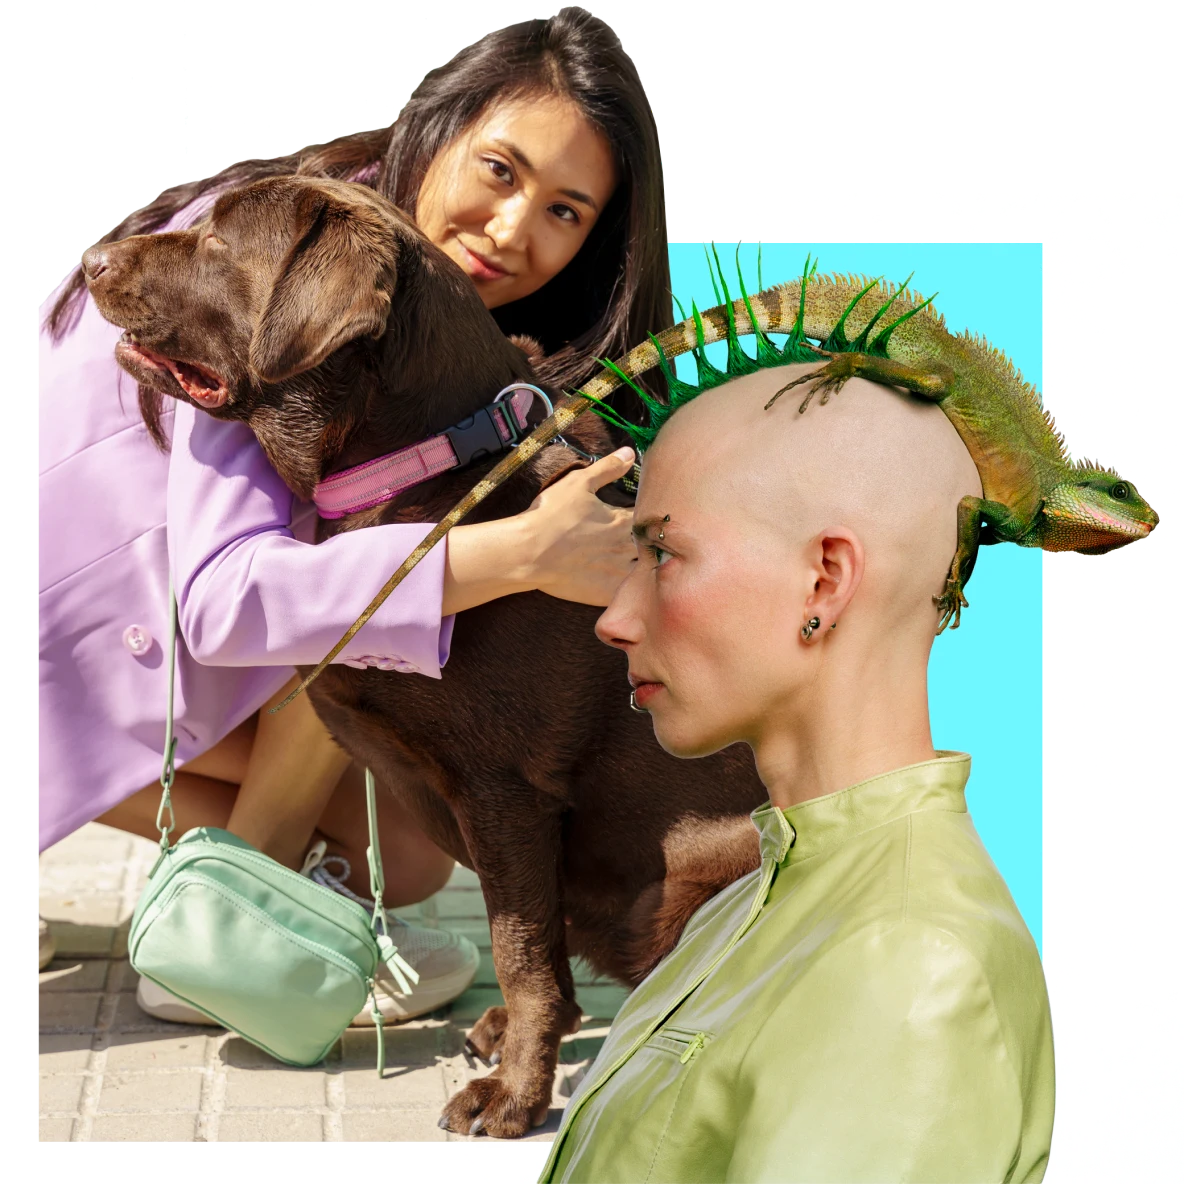 East Asian woman at left hugs a brown dog. White woman at right with spiky hair and an iguana on top of her head.
